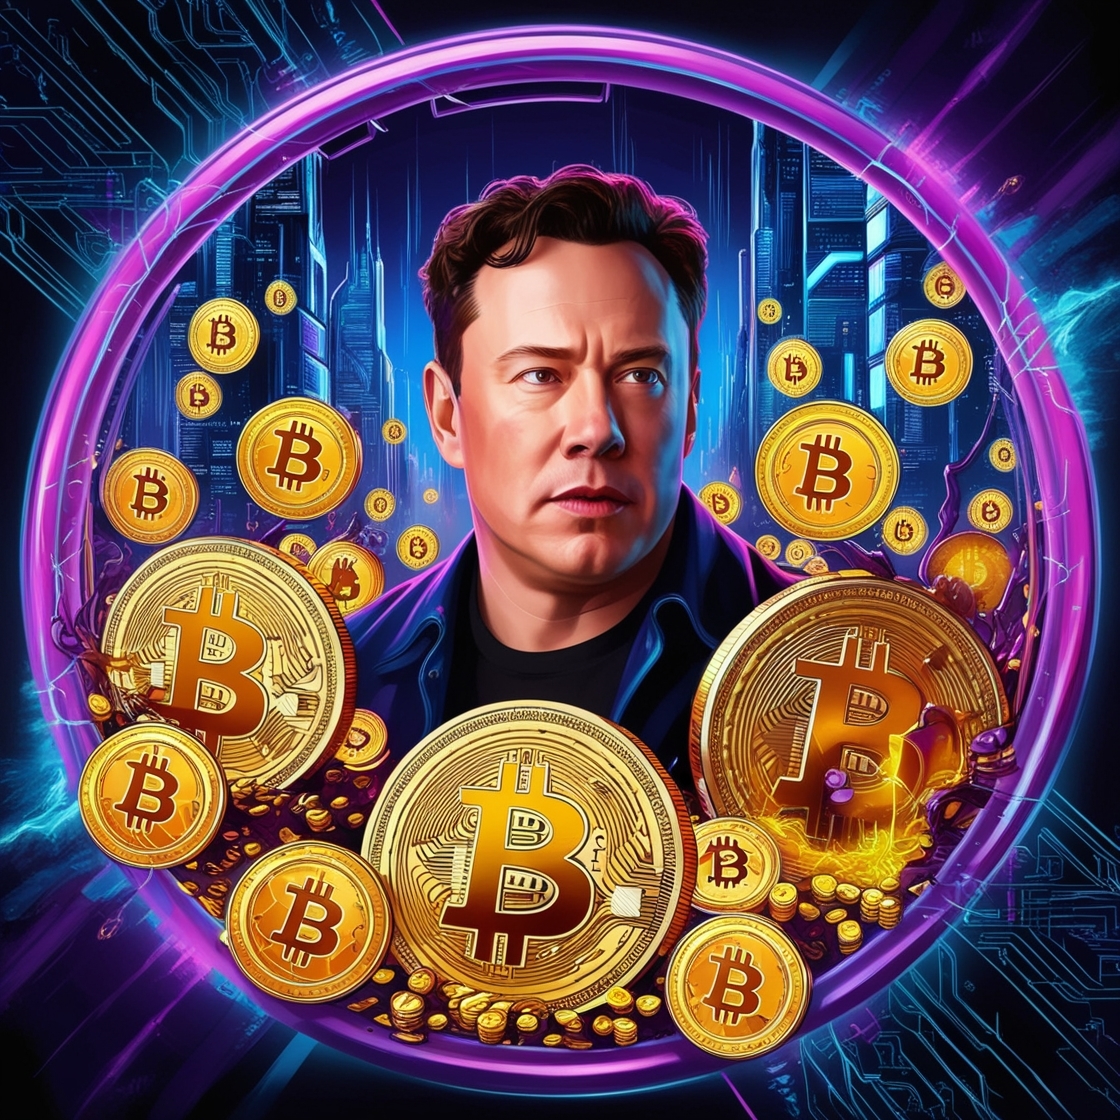 Elon Musk amidst a vibrant, neon-lit cityscape, surrounded by swirling cryptographic patterns and futuristic technology, depicted in a mesmerizing digital art style, blending realism with cyberpunk elements, where Musk's determined gaze pierces through a sea of golden Bitcoin symbols and cryptocurrency charts, set against a dark blue gradient background, with touches of electric blue and purple hues, accentuating the futuristic and avant-garde atmosphere, as if plucked straight from a Sci-Fi cinematic universe, exuding an air of revolutionary innovation and cutting-edge progress.